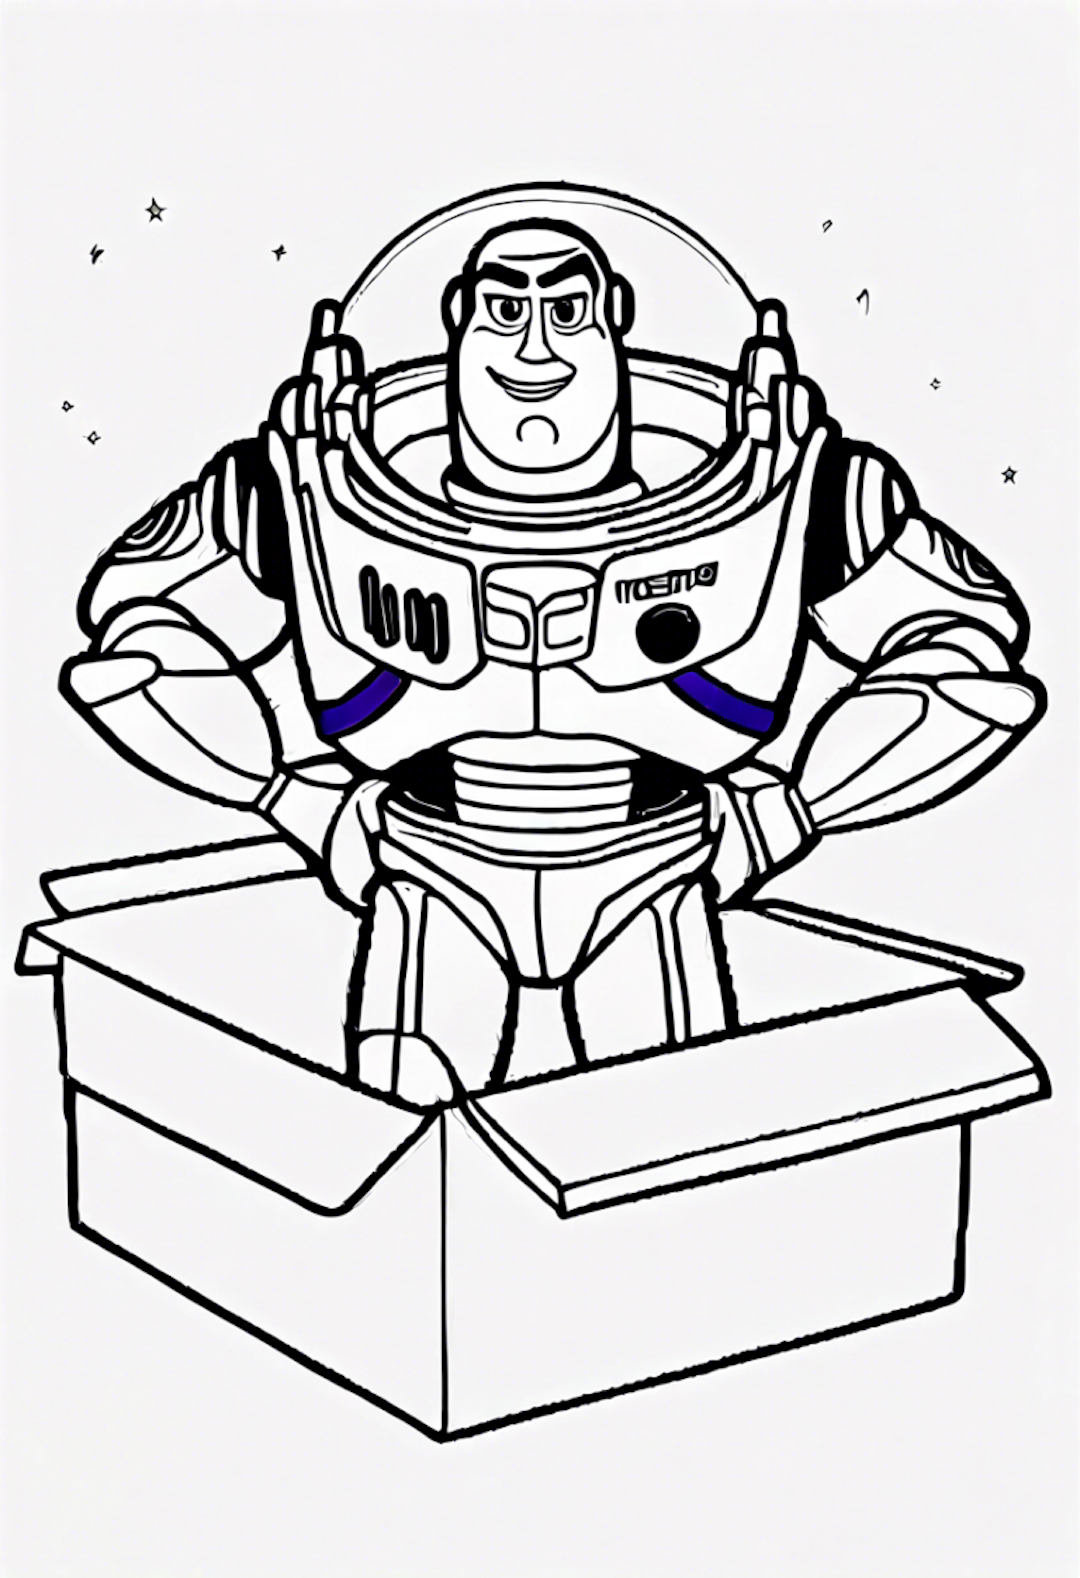 Buzz Lightyear Lying In A Box Of Toys coloring pages